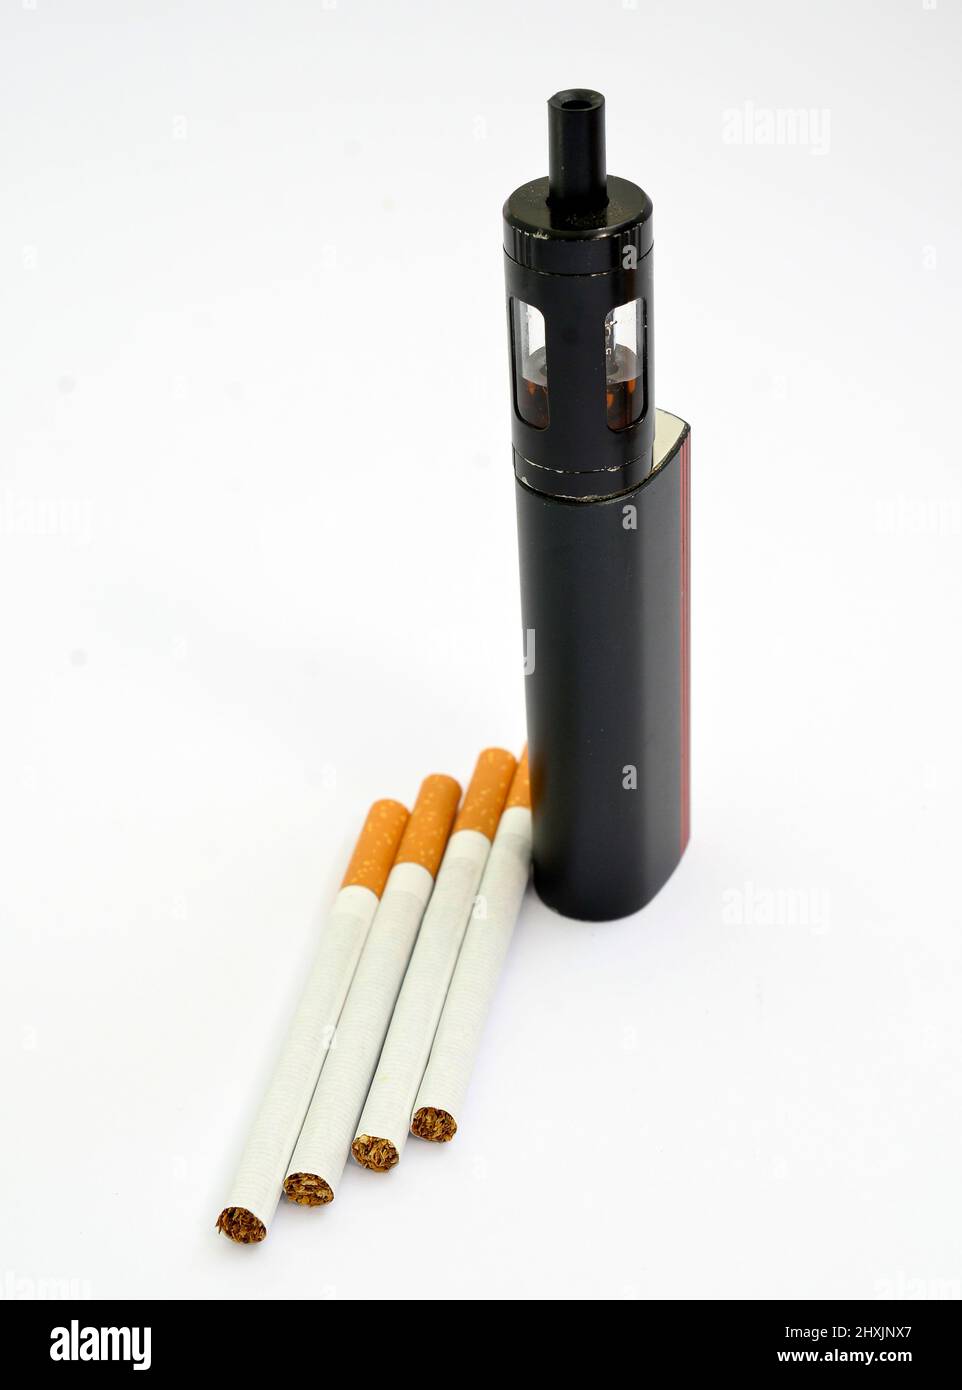 Vaping device, electronic cigarette and cigarettes white background. Stock Photo